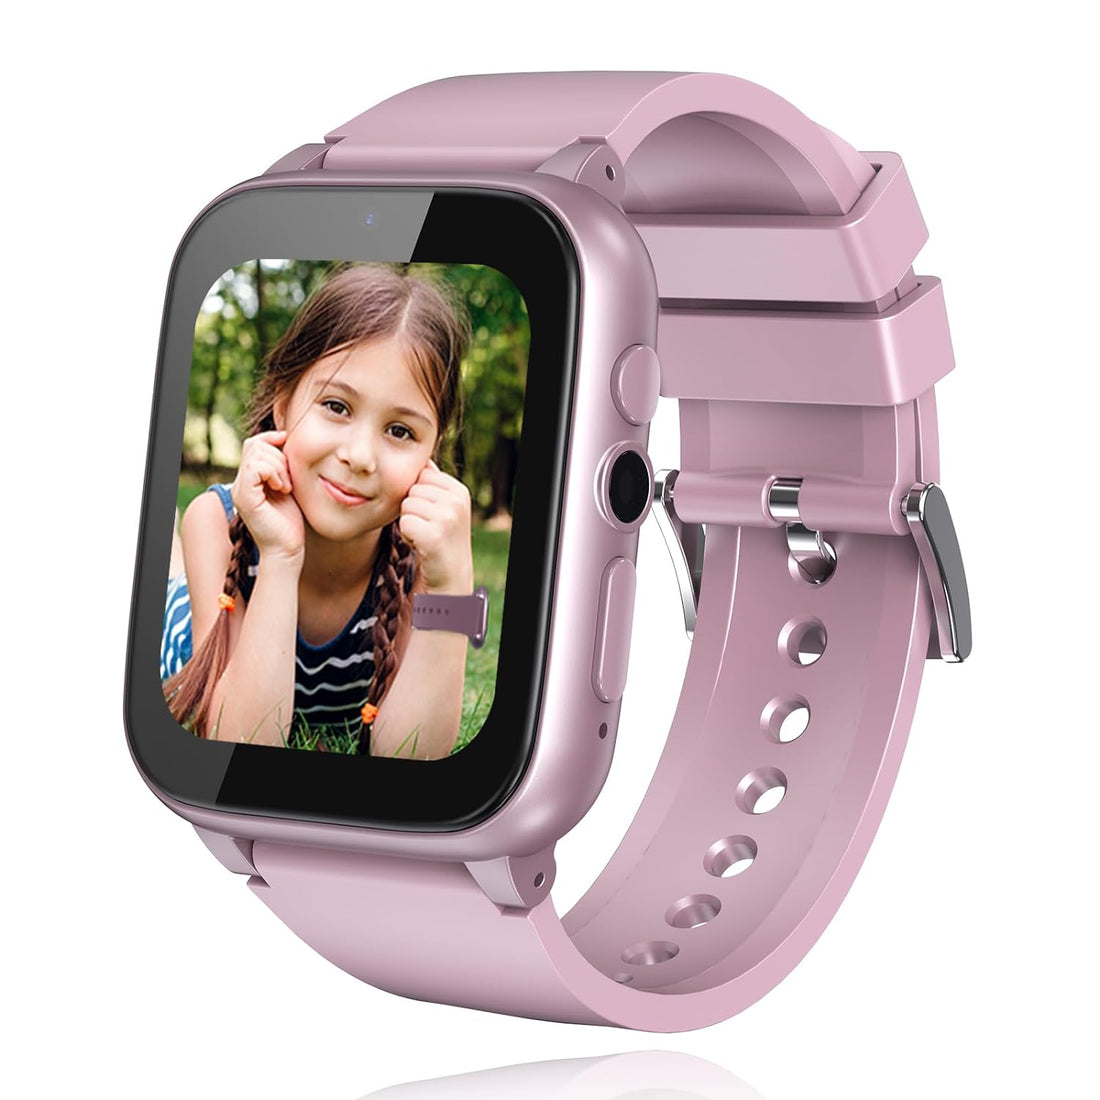 iCHOMKE Smart Watch for Kids, Girls Boys Smartwatch with 26 Games Camera Video Recorder and Player, Pedometer Calendar Flashlight, Audio Book etc., Gifts for 4-12 Years Children (Pink)